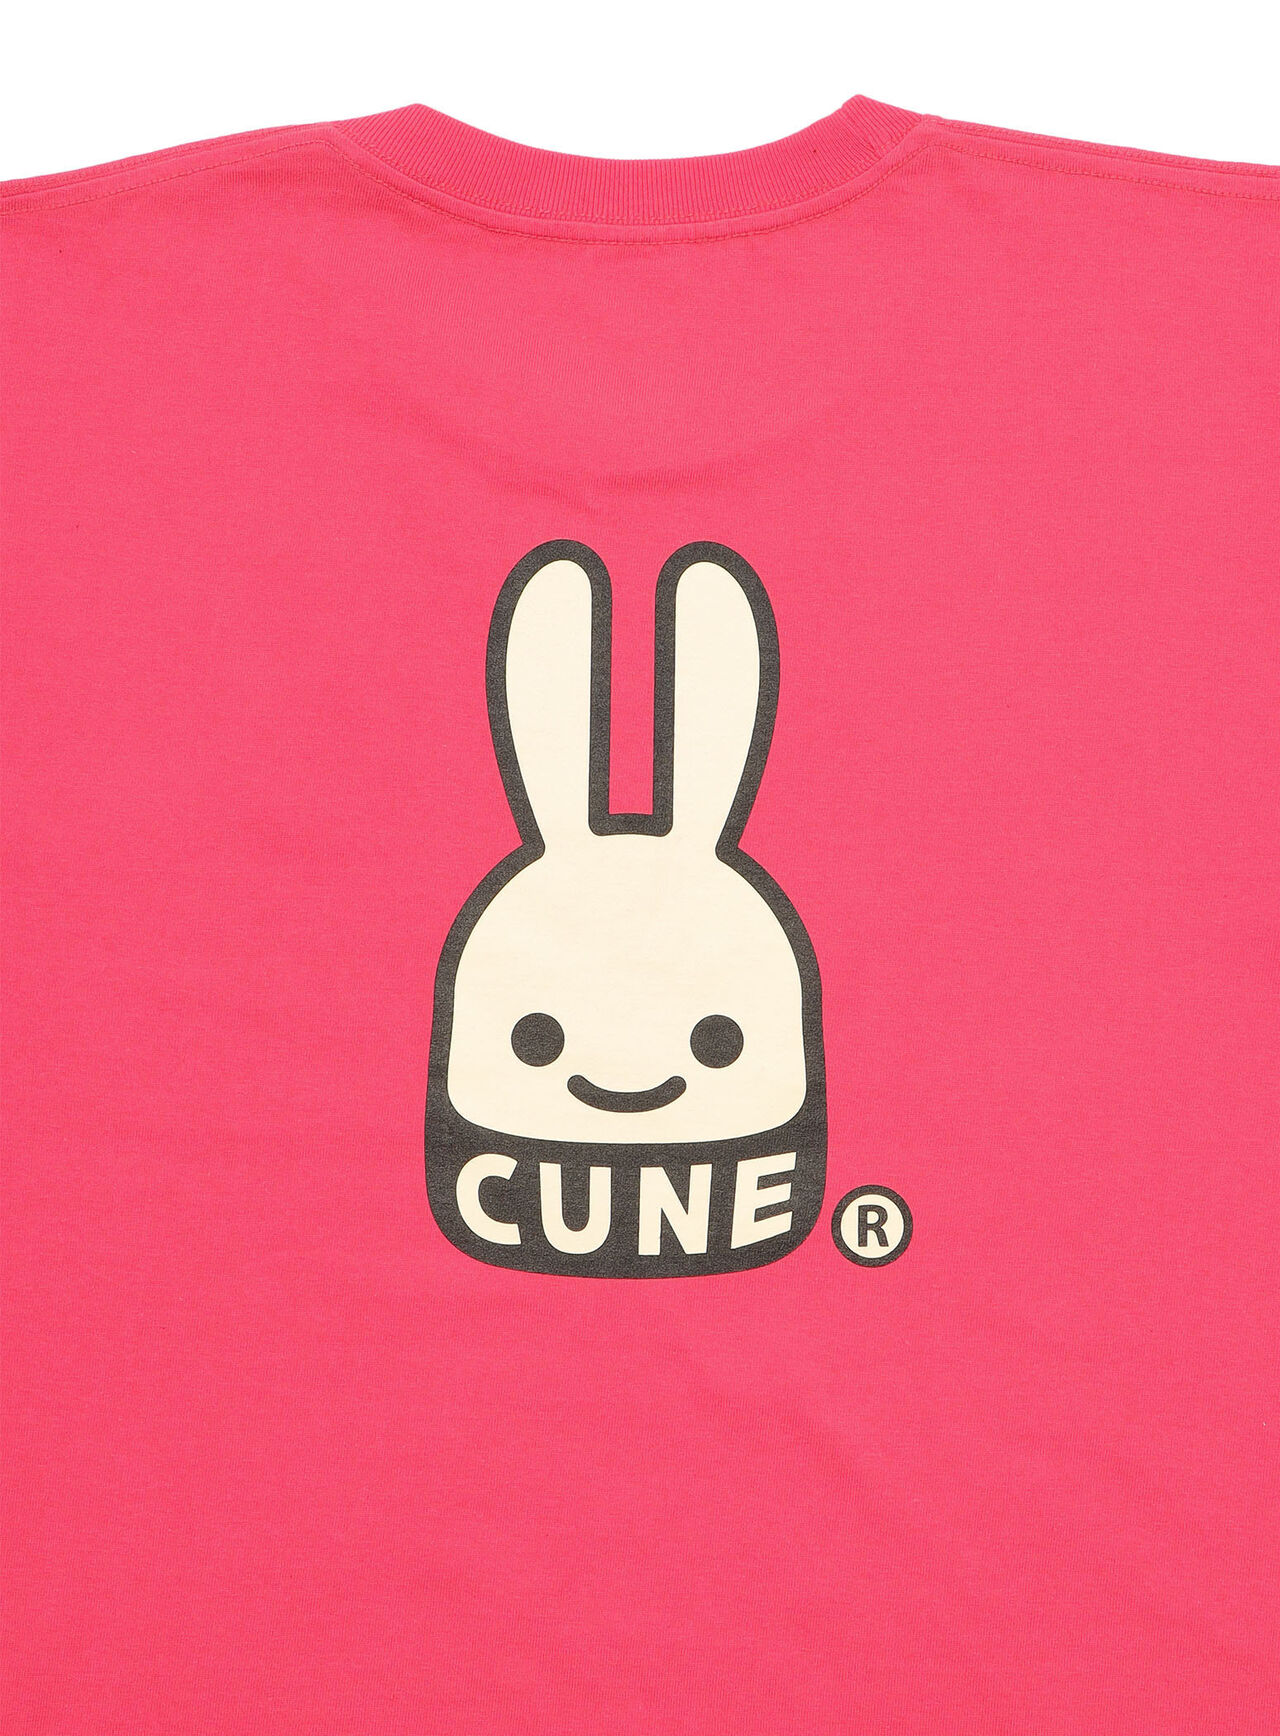 S/S Tee CUNE Rabbit,L, large image number 5